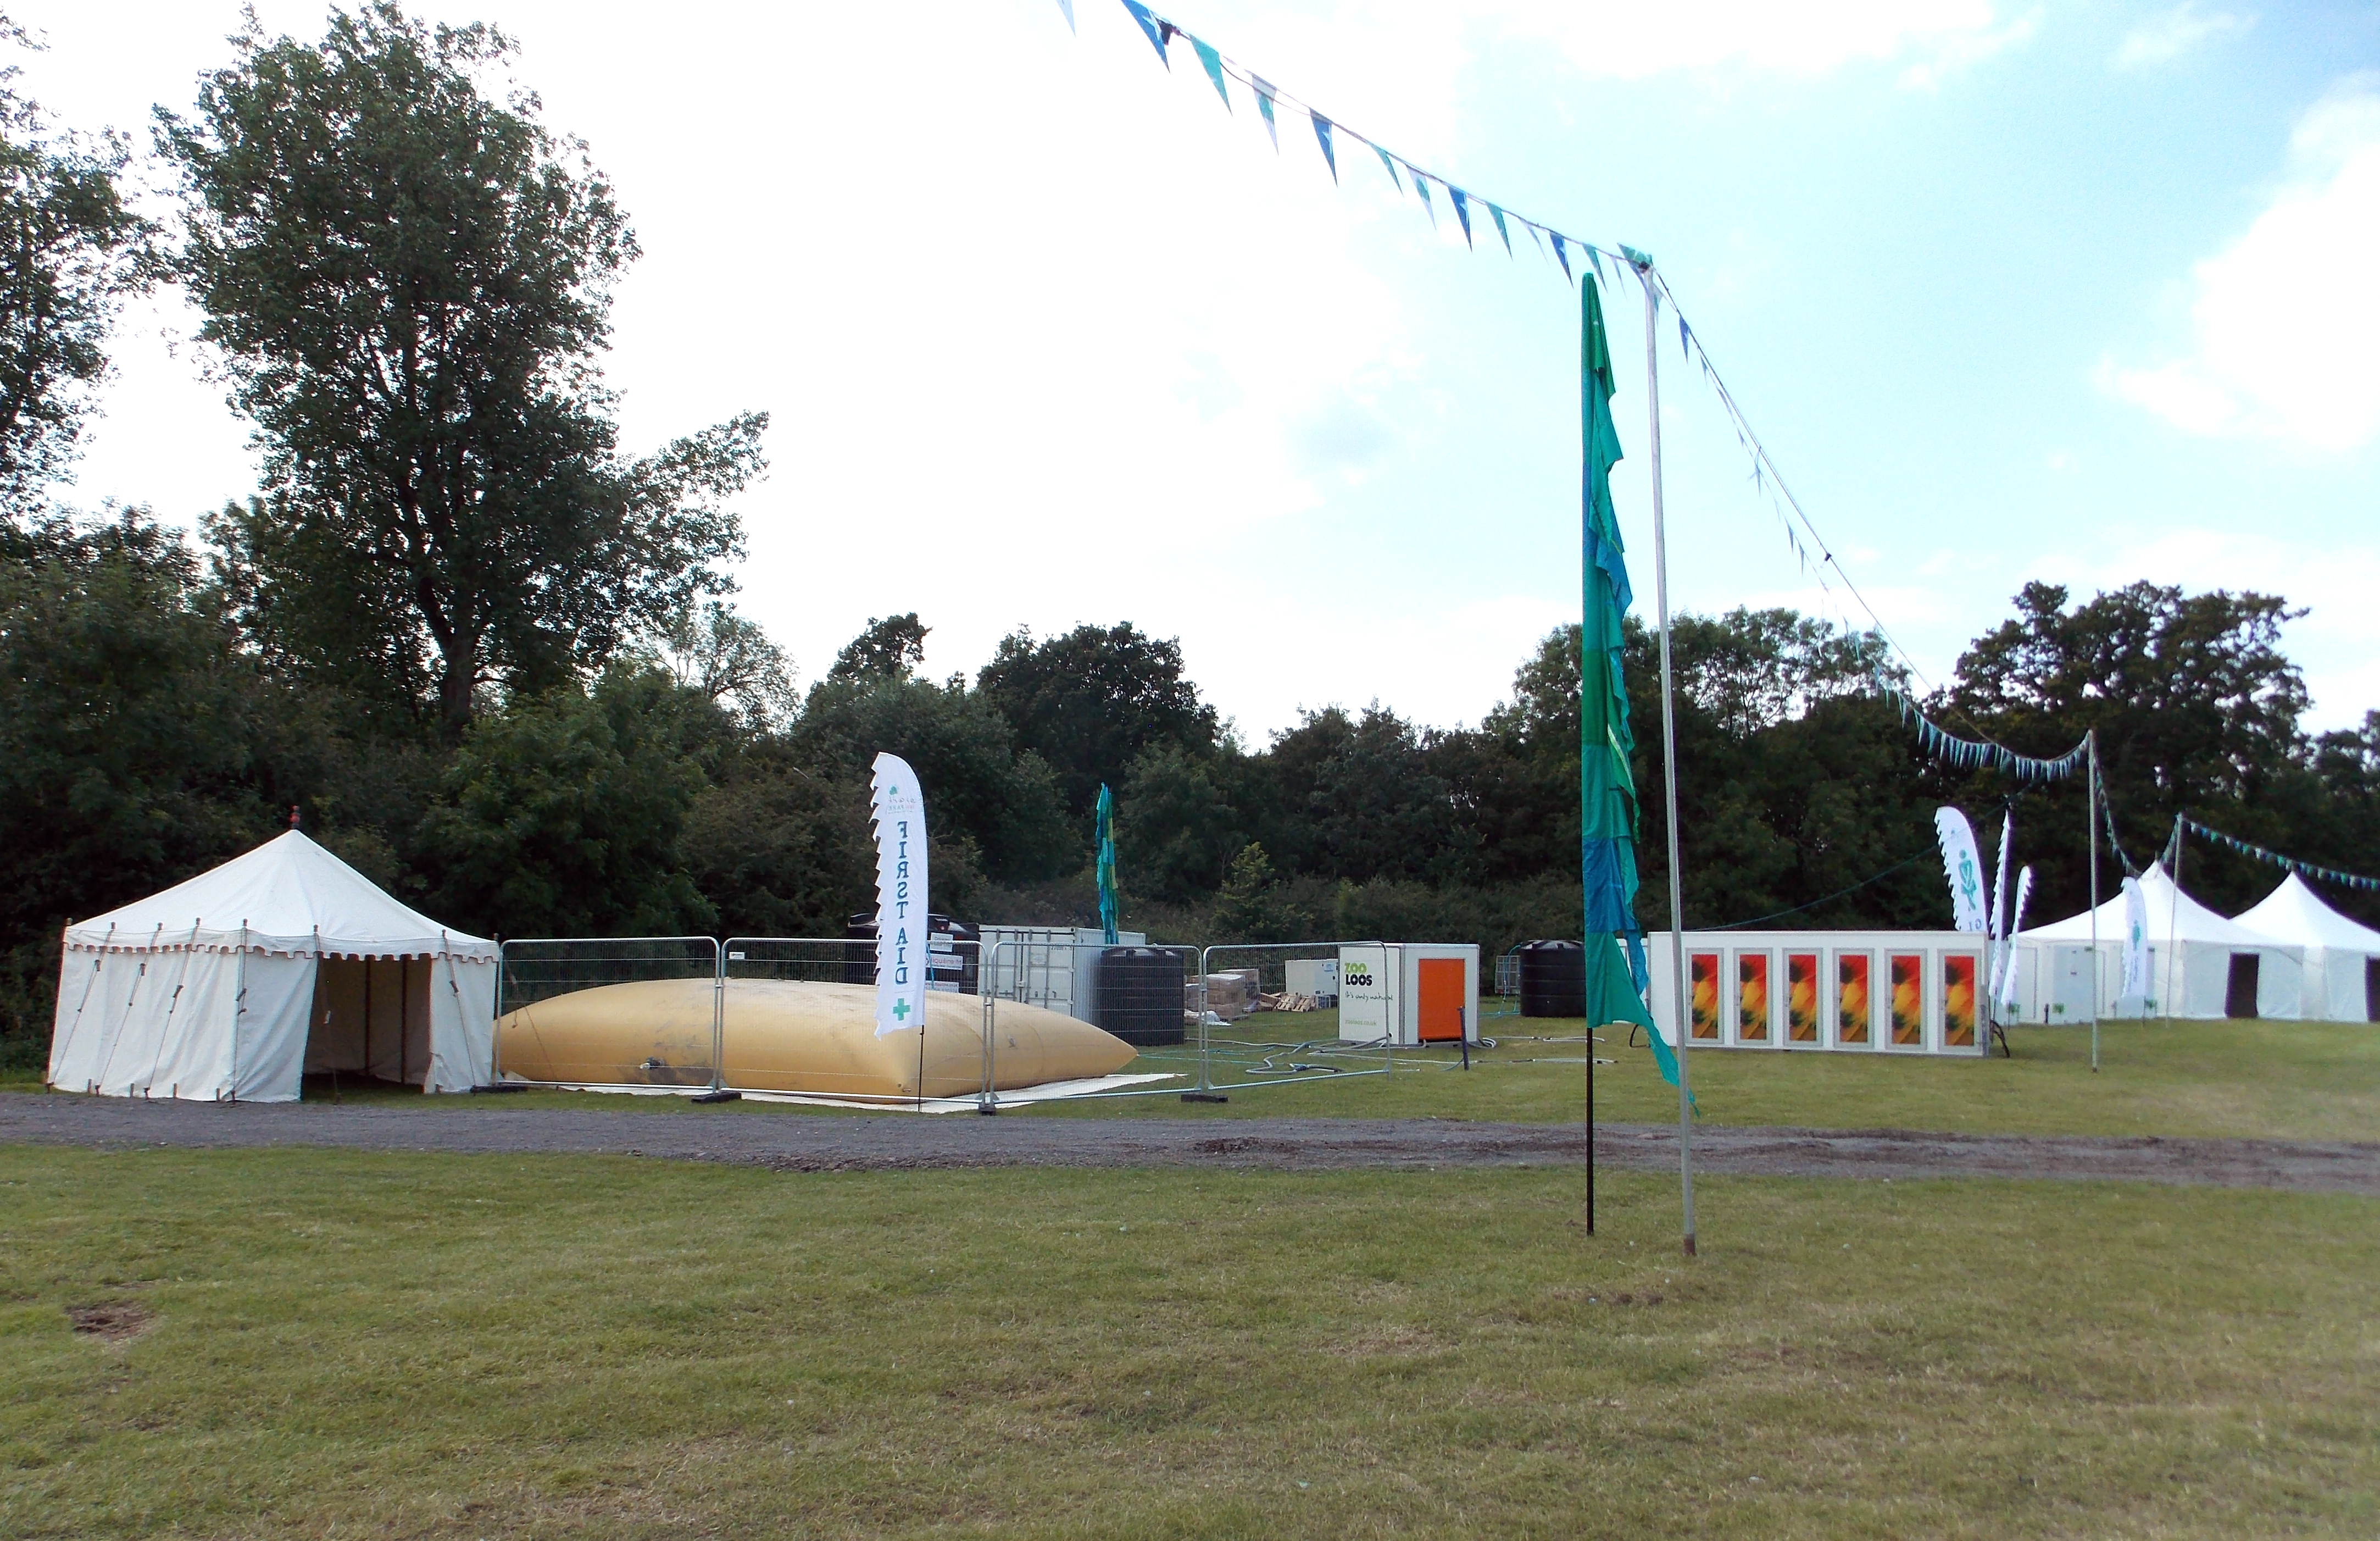 File:Aldenham Country Park event field with tents, toilet units ...